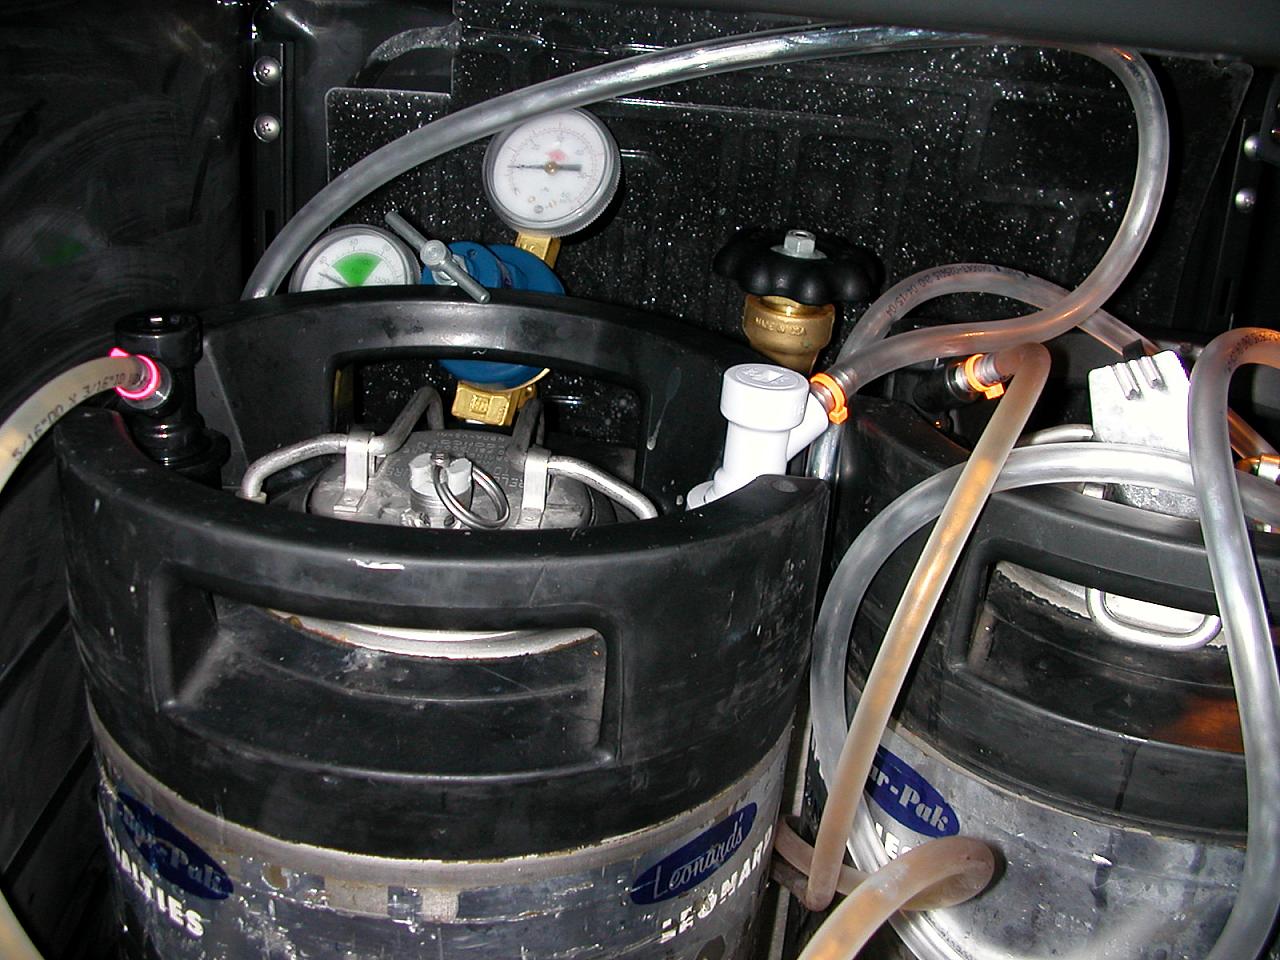 The regulator and co2 tank are tucked behind the kegs.